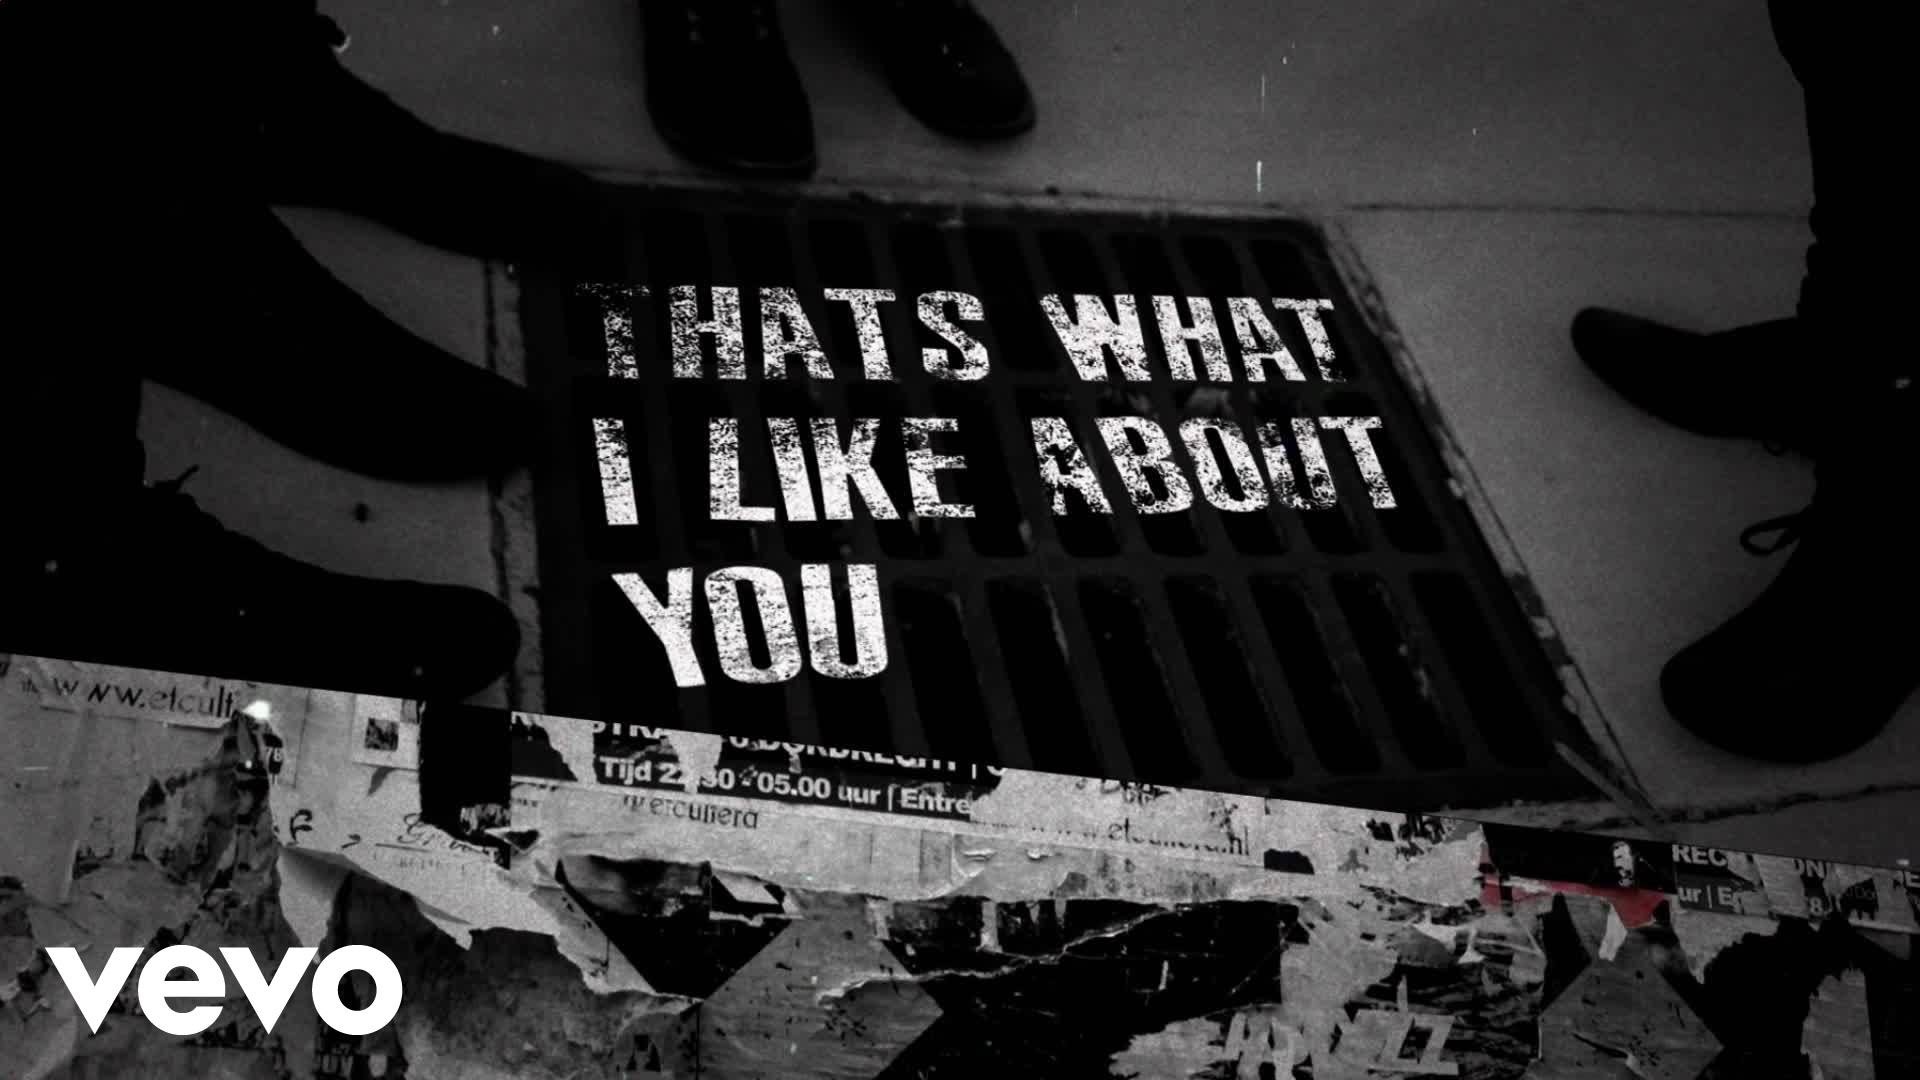 1920x1080 5 Seconds Of Summer - What I Like About You (Lyric Video)